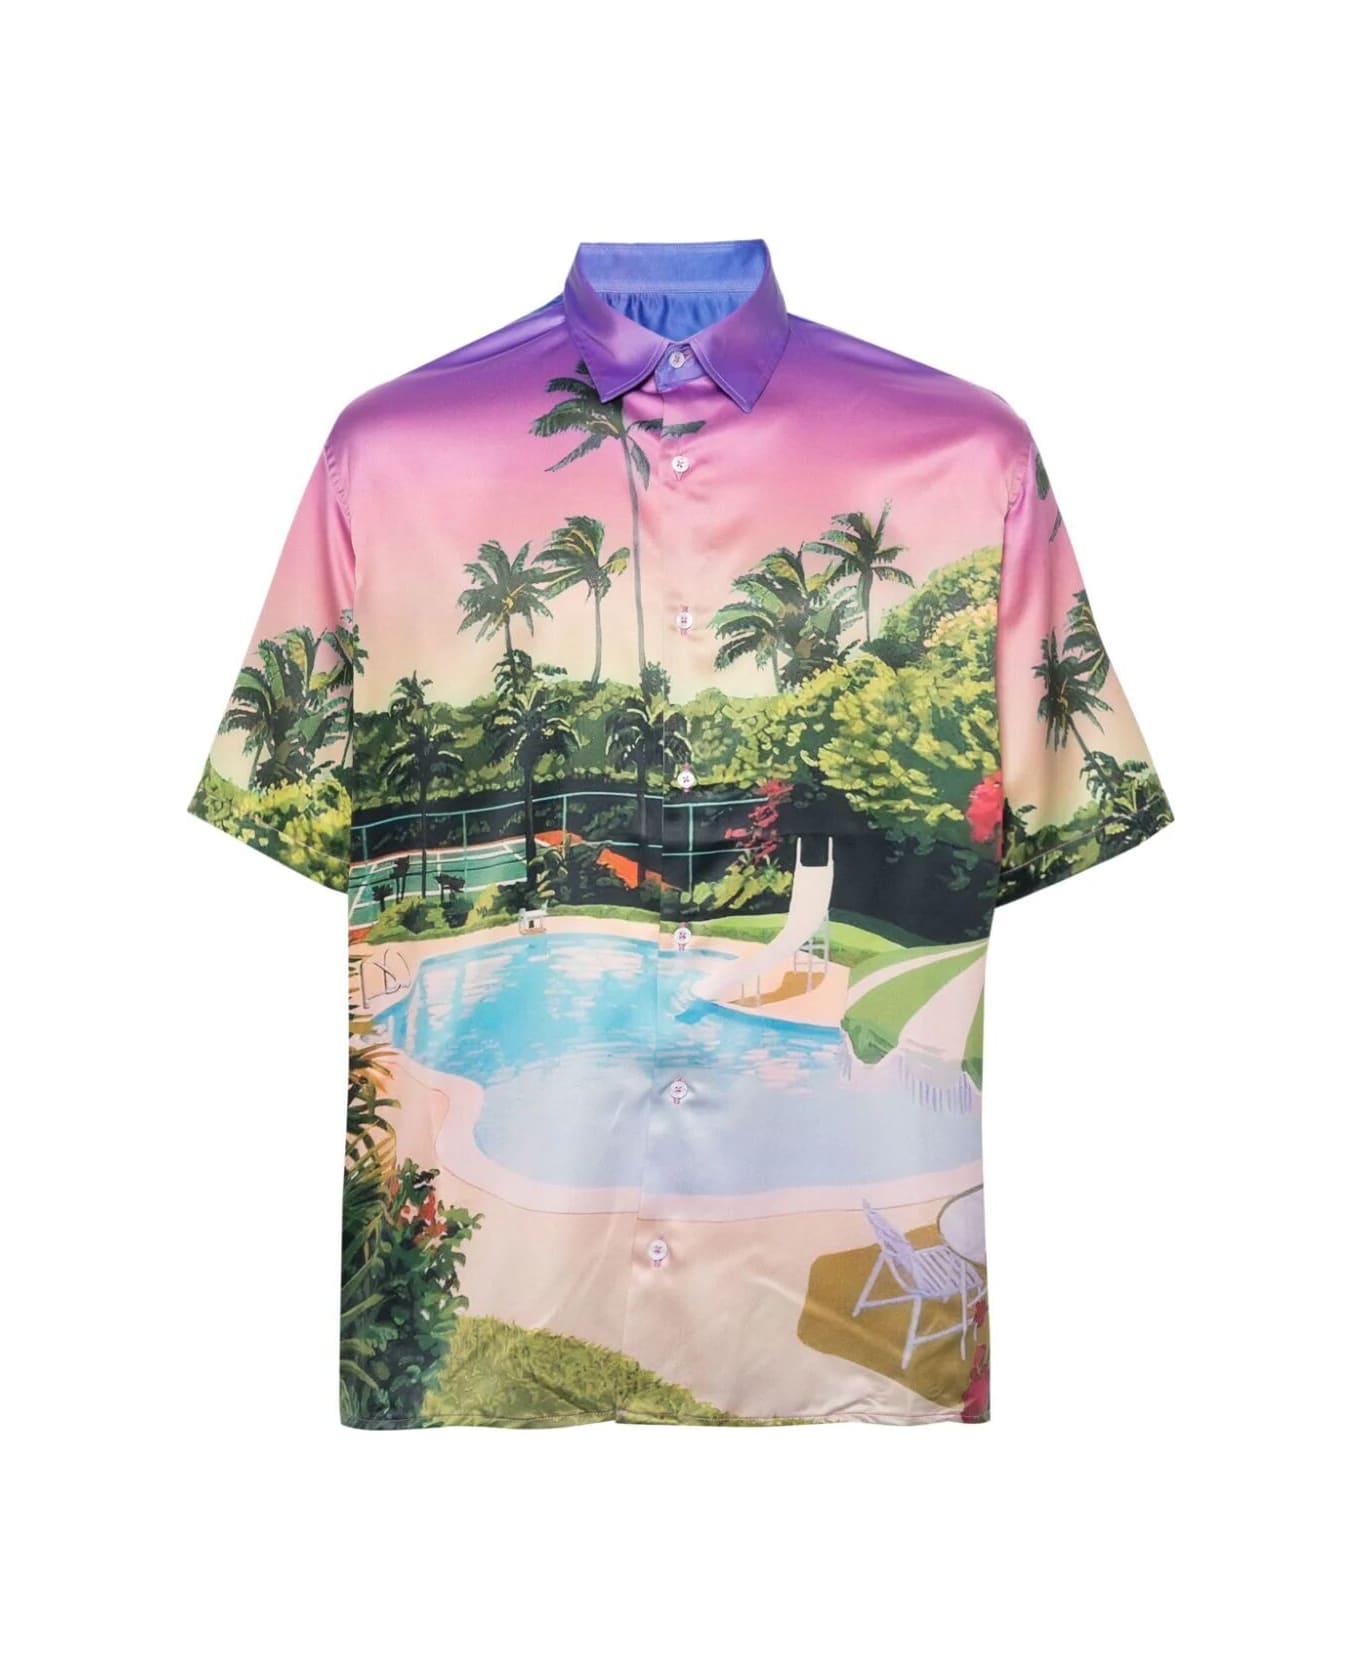 Family First Milano Sunset Shirt - Multicolor